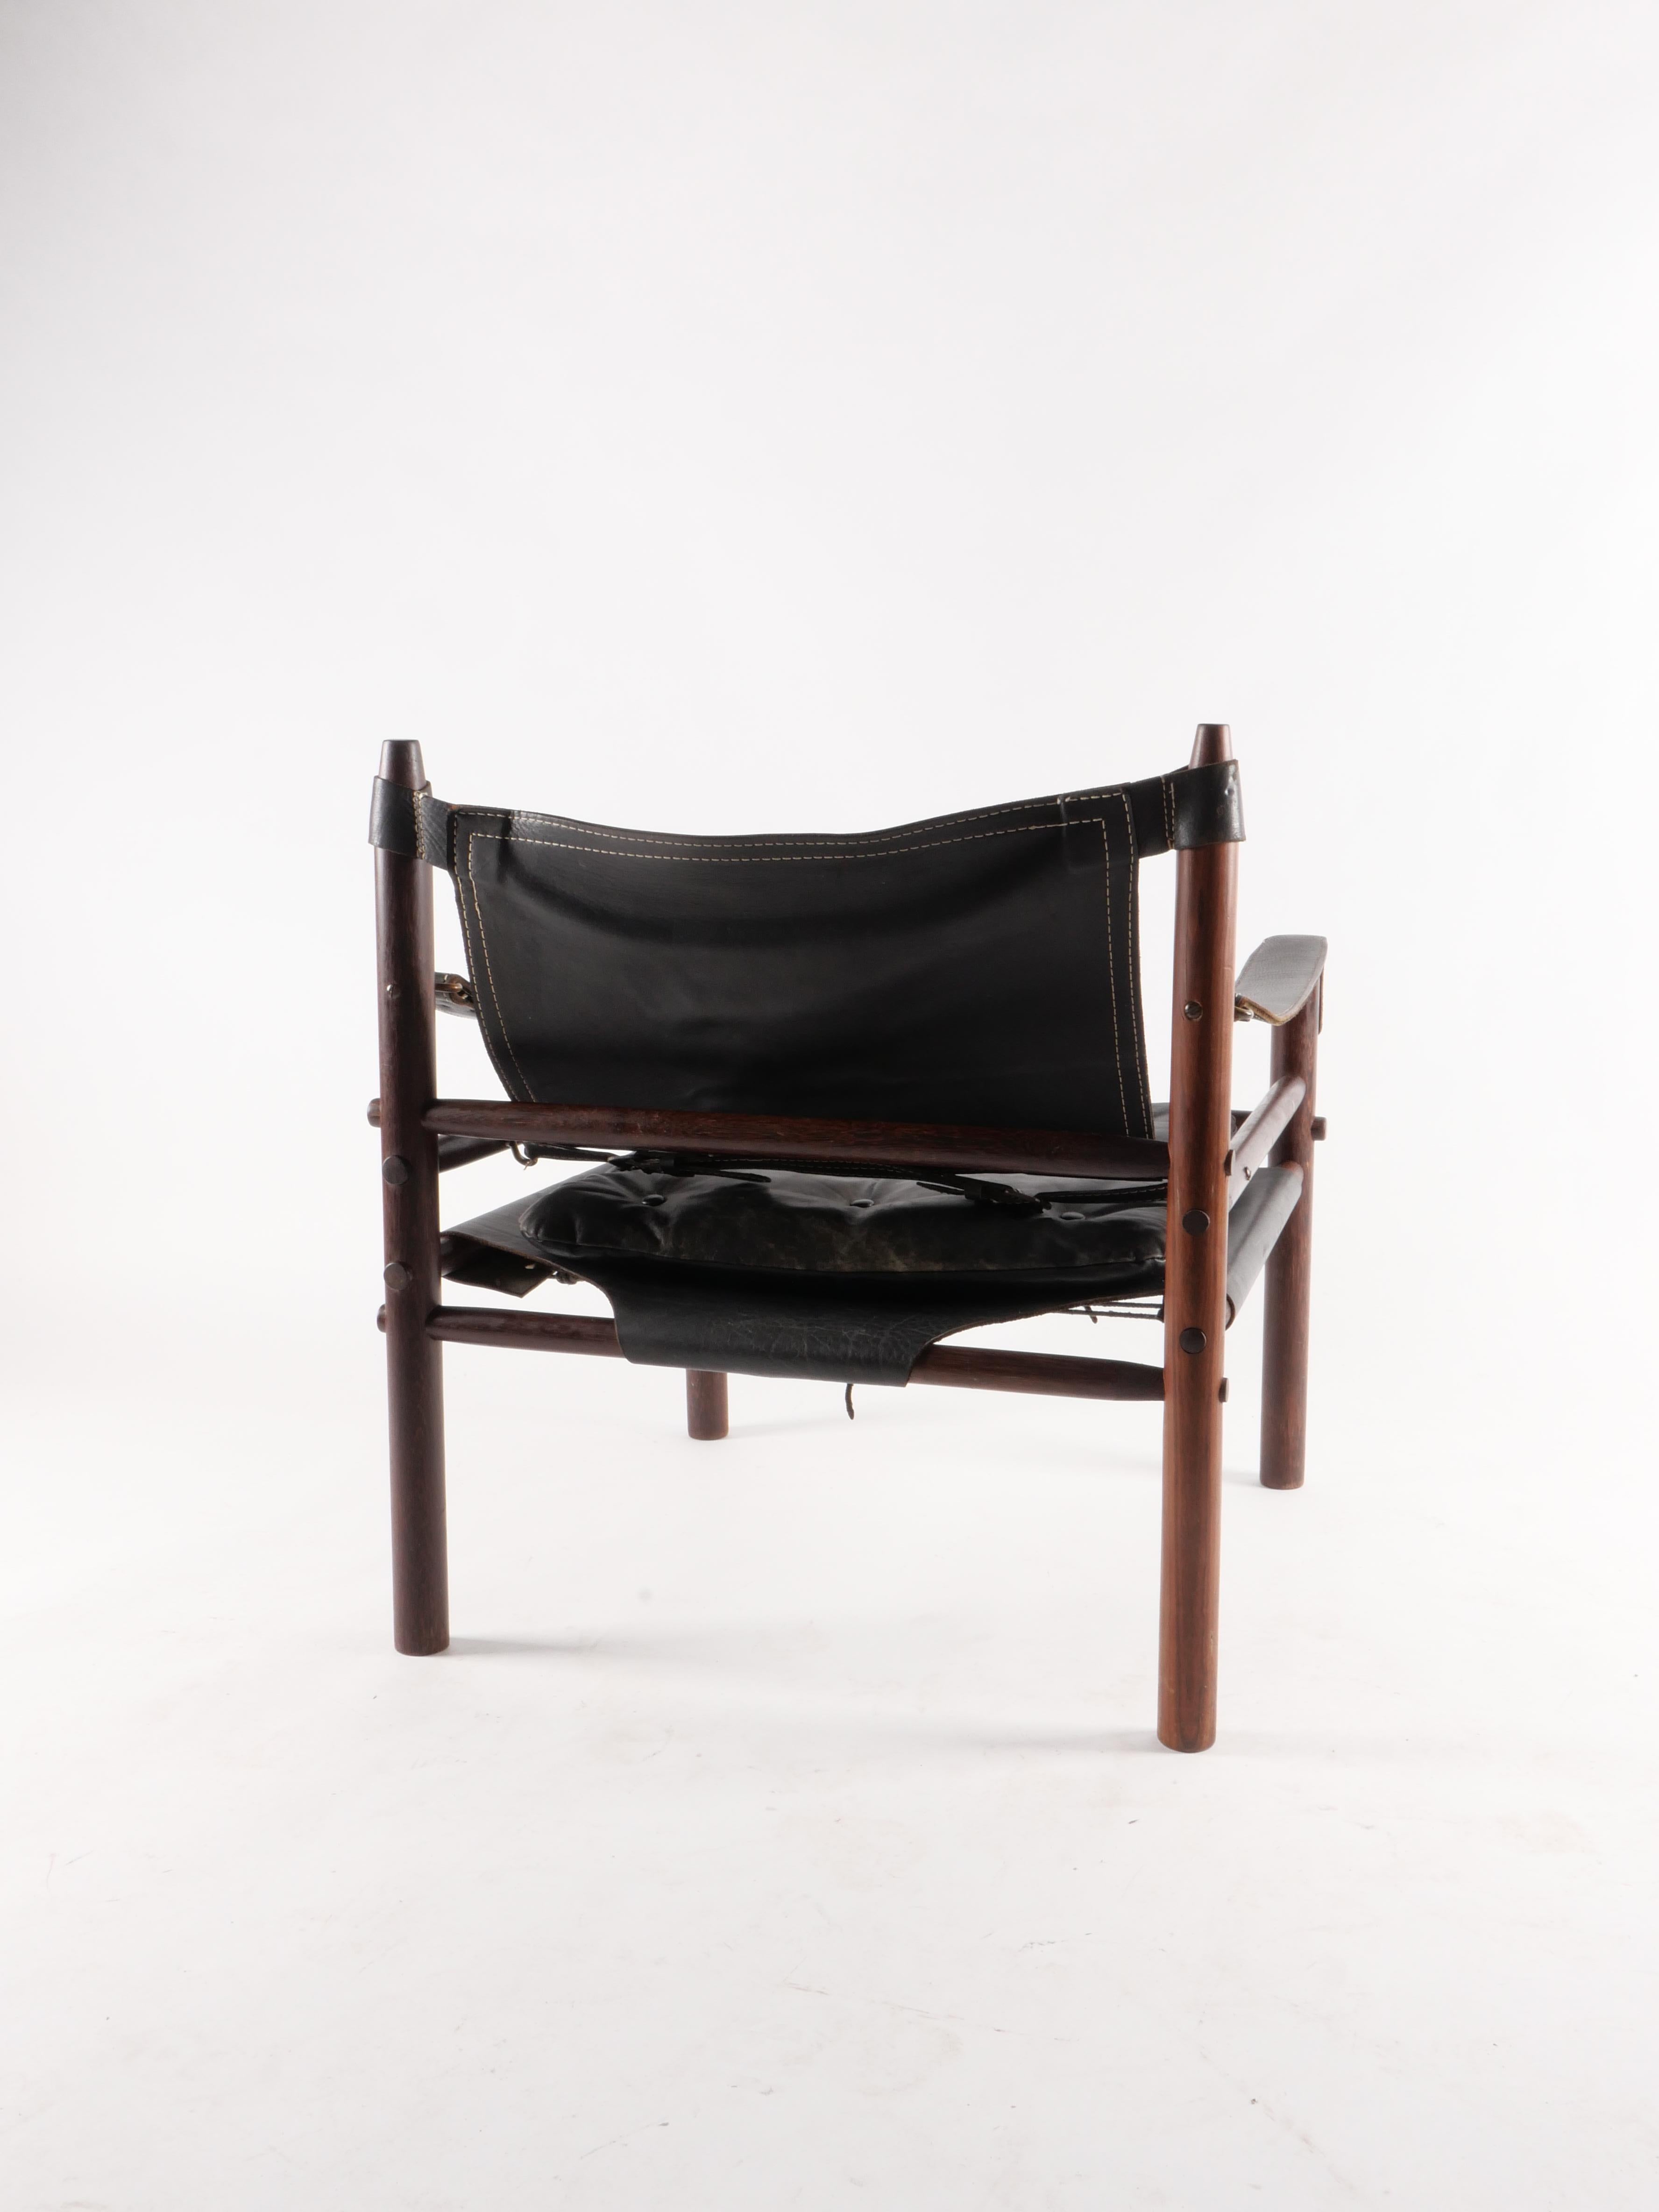 20th Century “Sirocco” Safari Chair in Leather by Arne Norell 